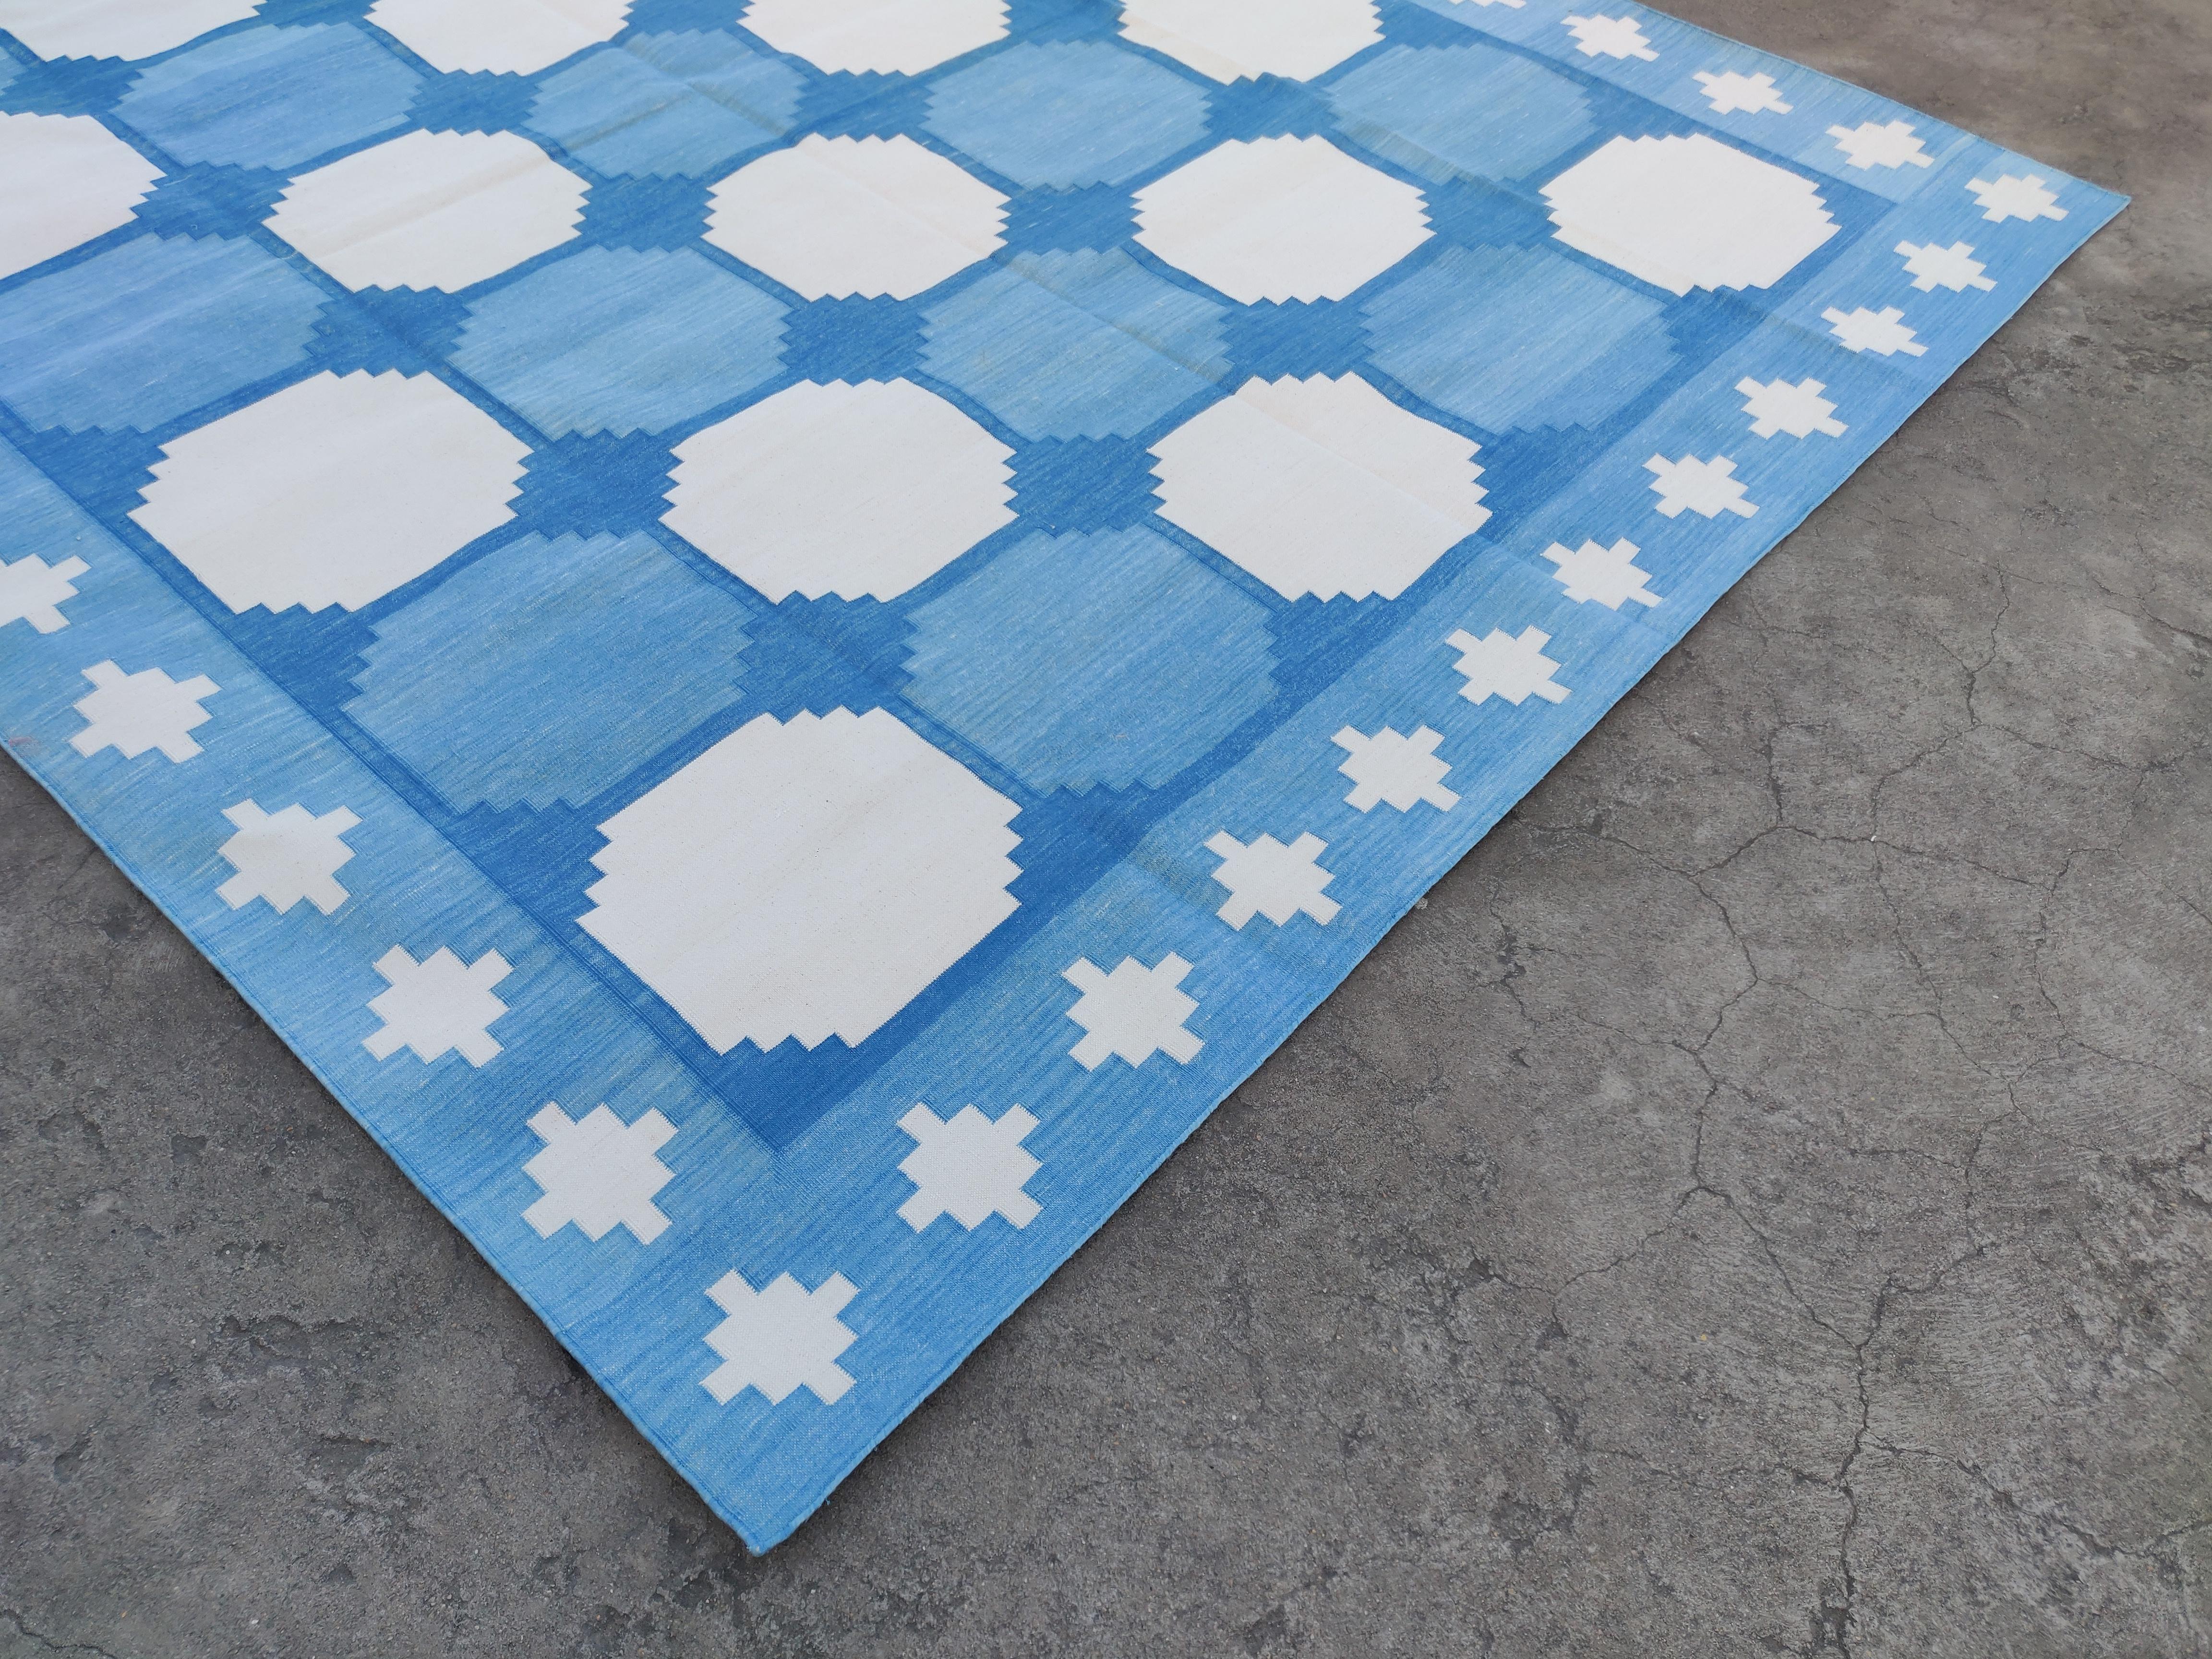 Handmade Cotton Flat Weave Rug, 9x12 Blue And White Tile Pattern Indian Dhurrie In New Condition For Sale In Jaipur, IN